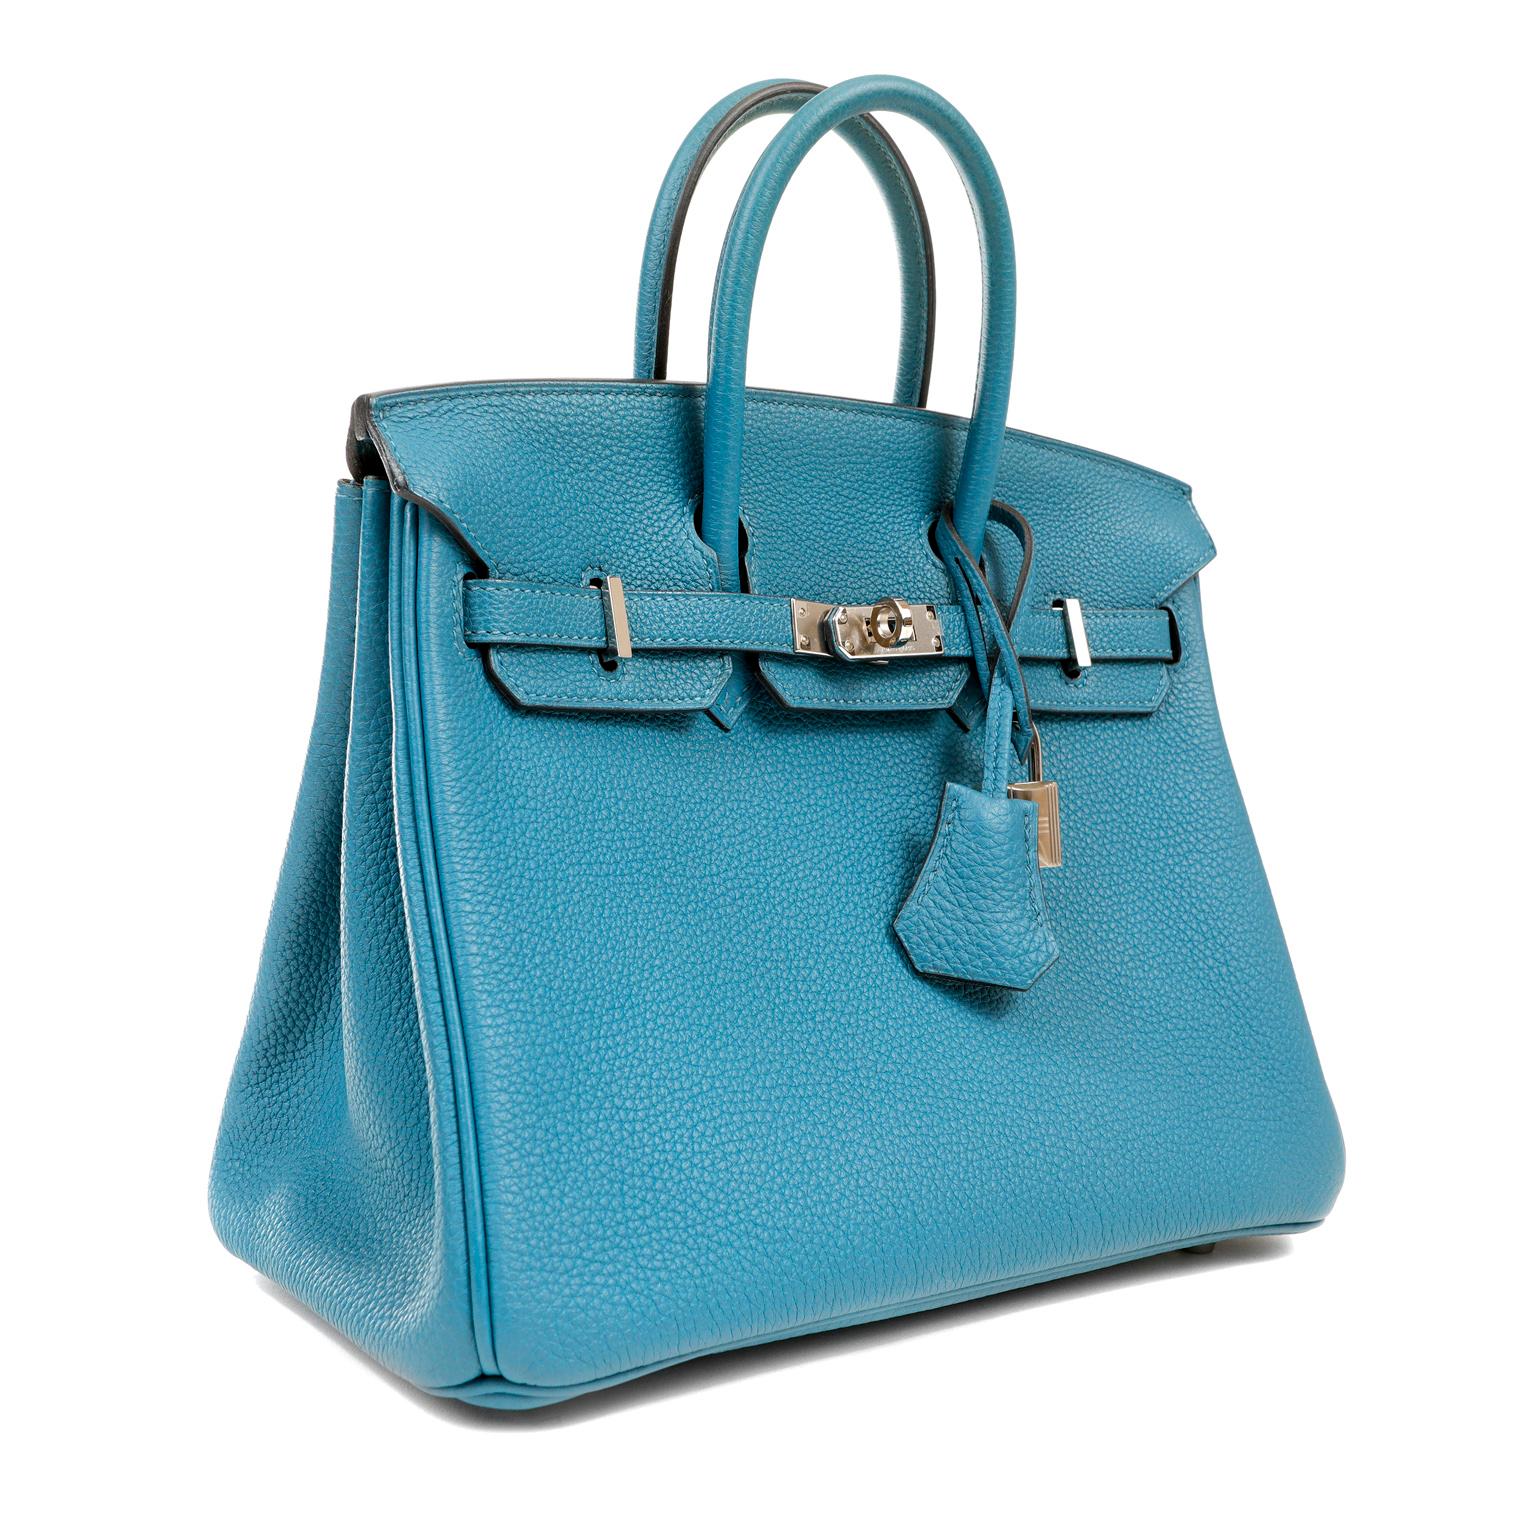 This authentic Hermès Blue Togo 25 cm Birkin Bag is in pristine unworn condition with the plastic intact on the hardware.  Waitlists exceeding a year are commonplace for the intensely coveted leather Birkin bag.  Each piece is hand sewn by skilled